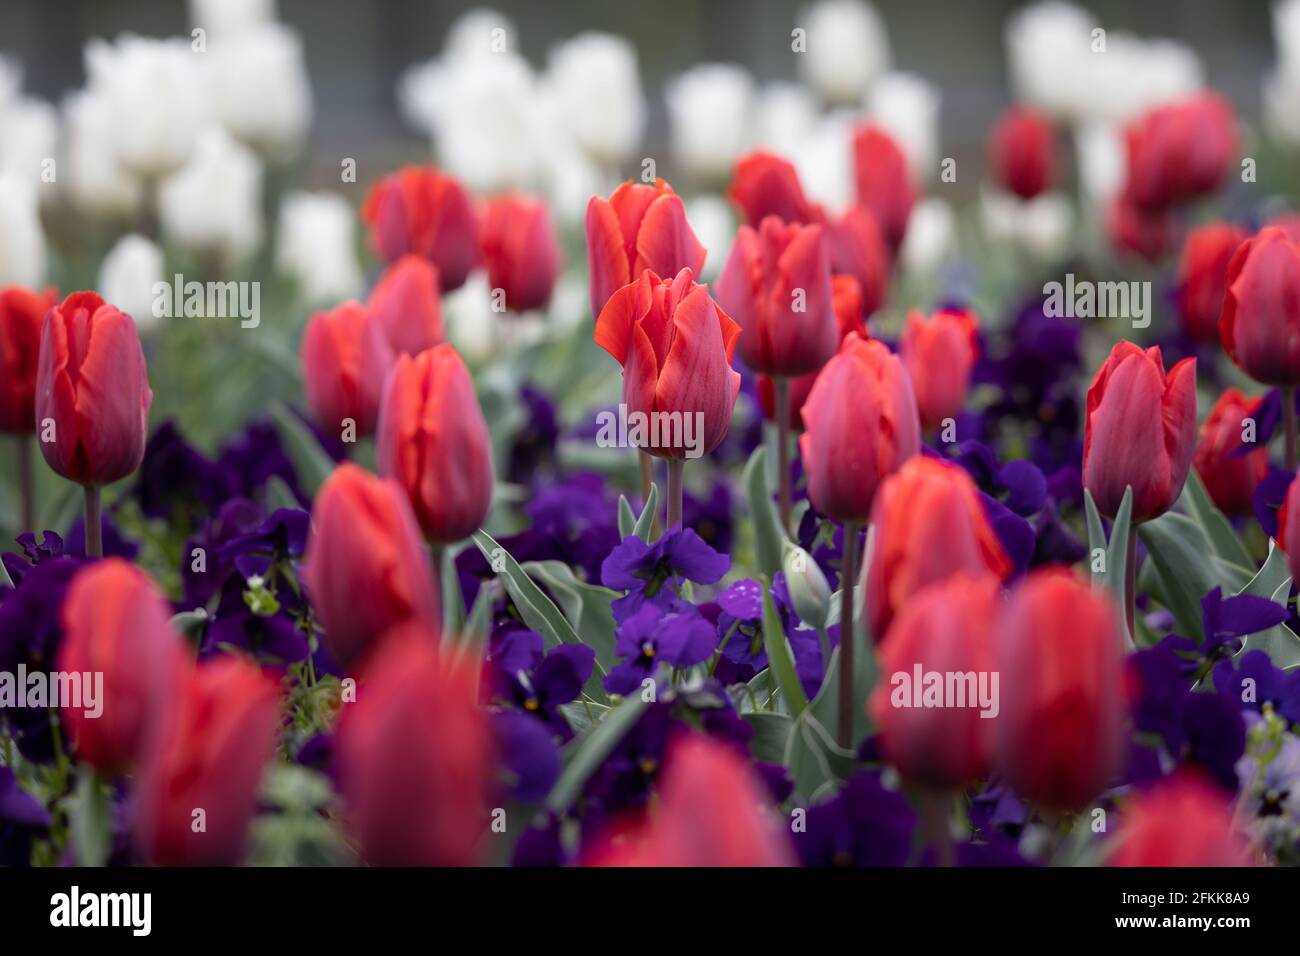 colorful fresh red tulips in a bed of spring flowers blurred background Stock Photo